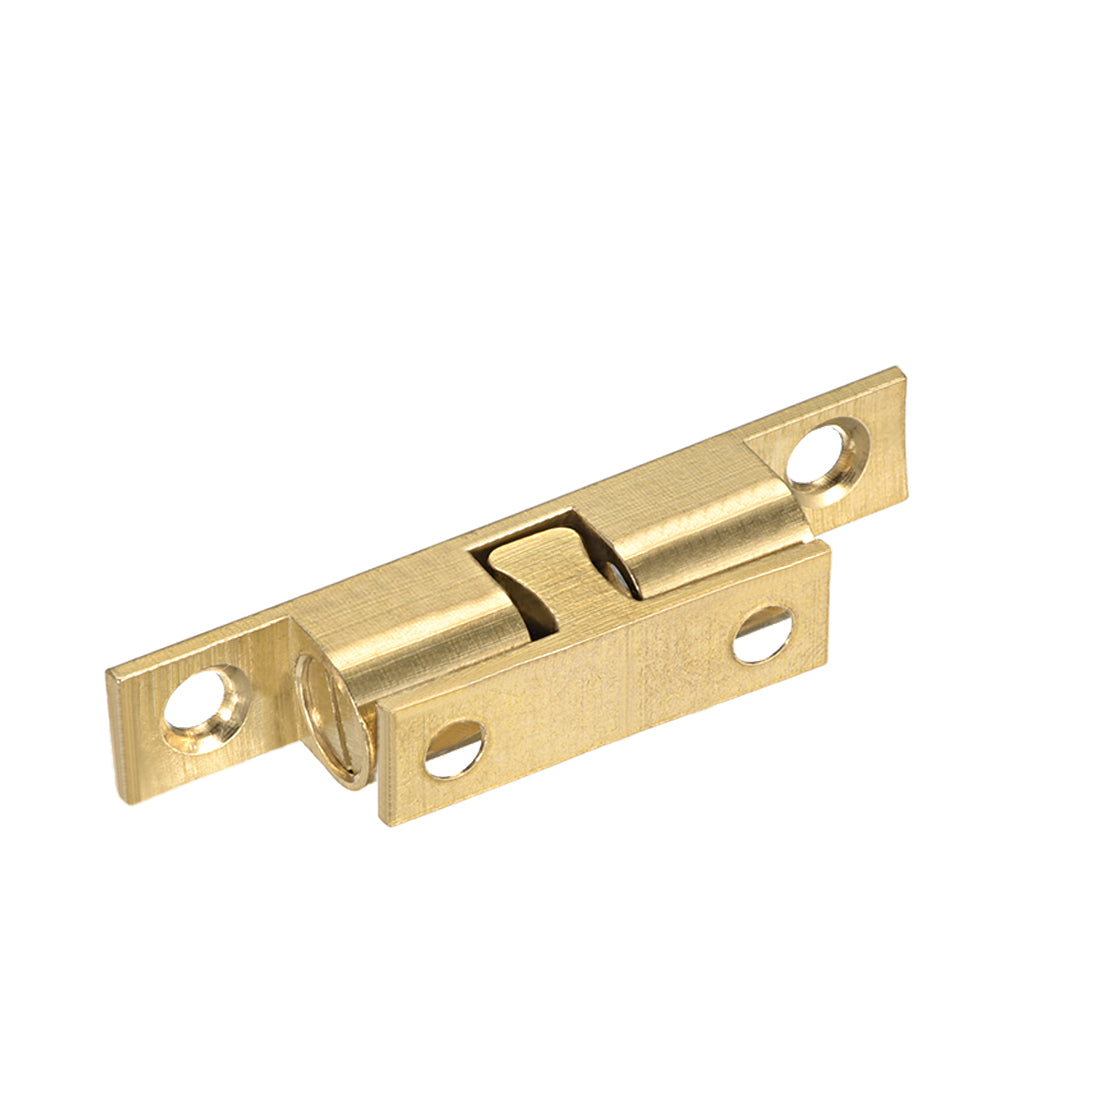 uxcell Uxcell Cabinet Door Closet Brass Double Ball Catch Tension Latch 60mm Length Gold Tone 5pcs